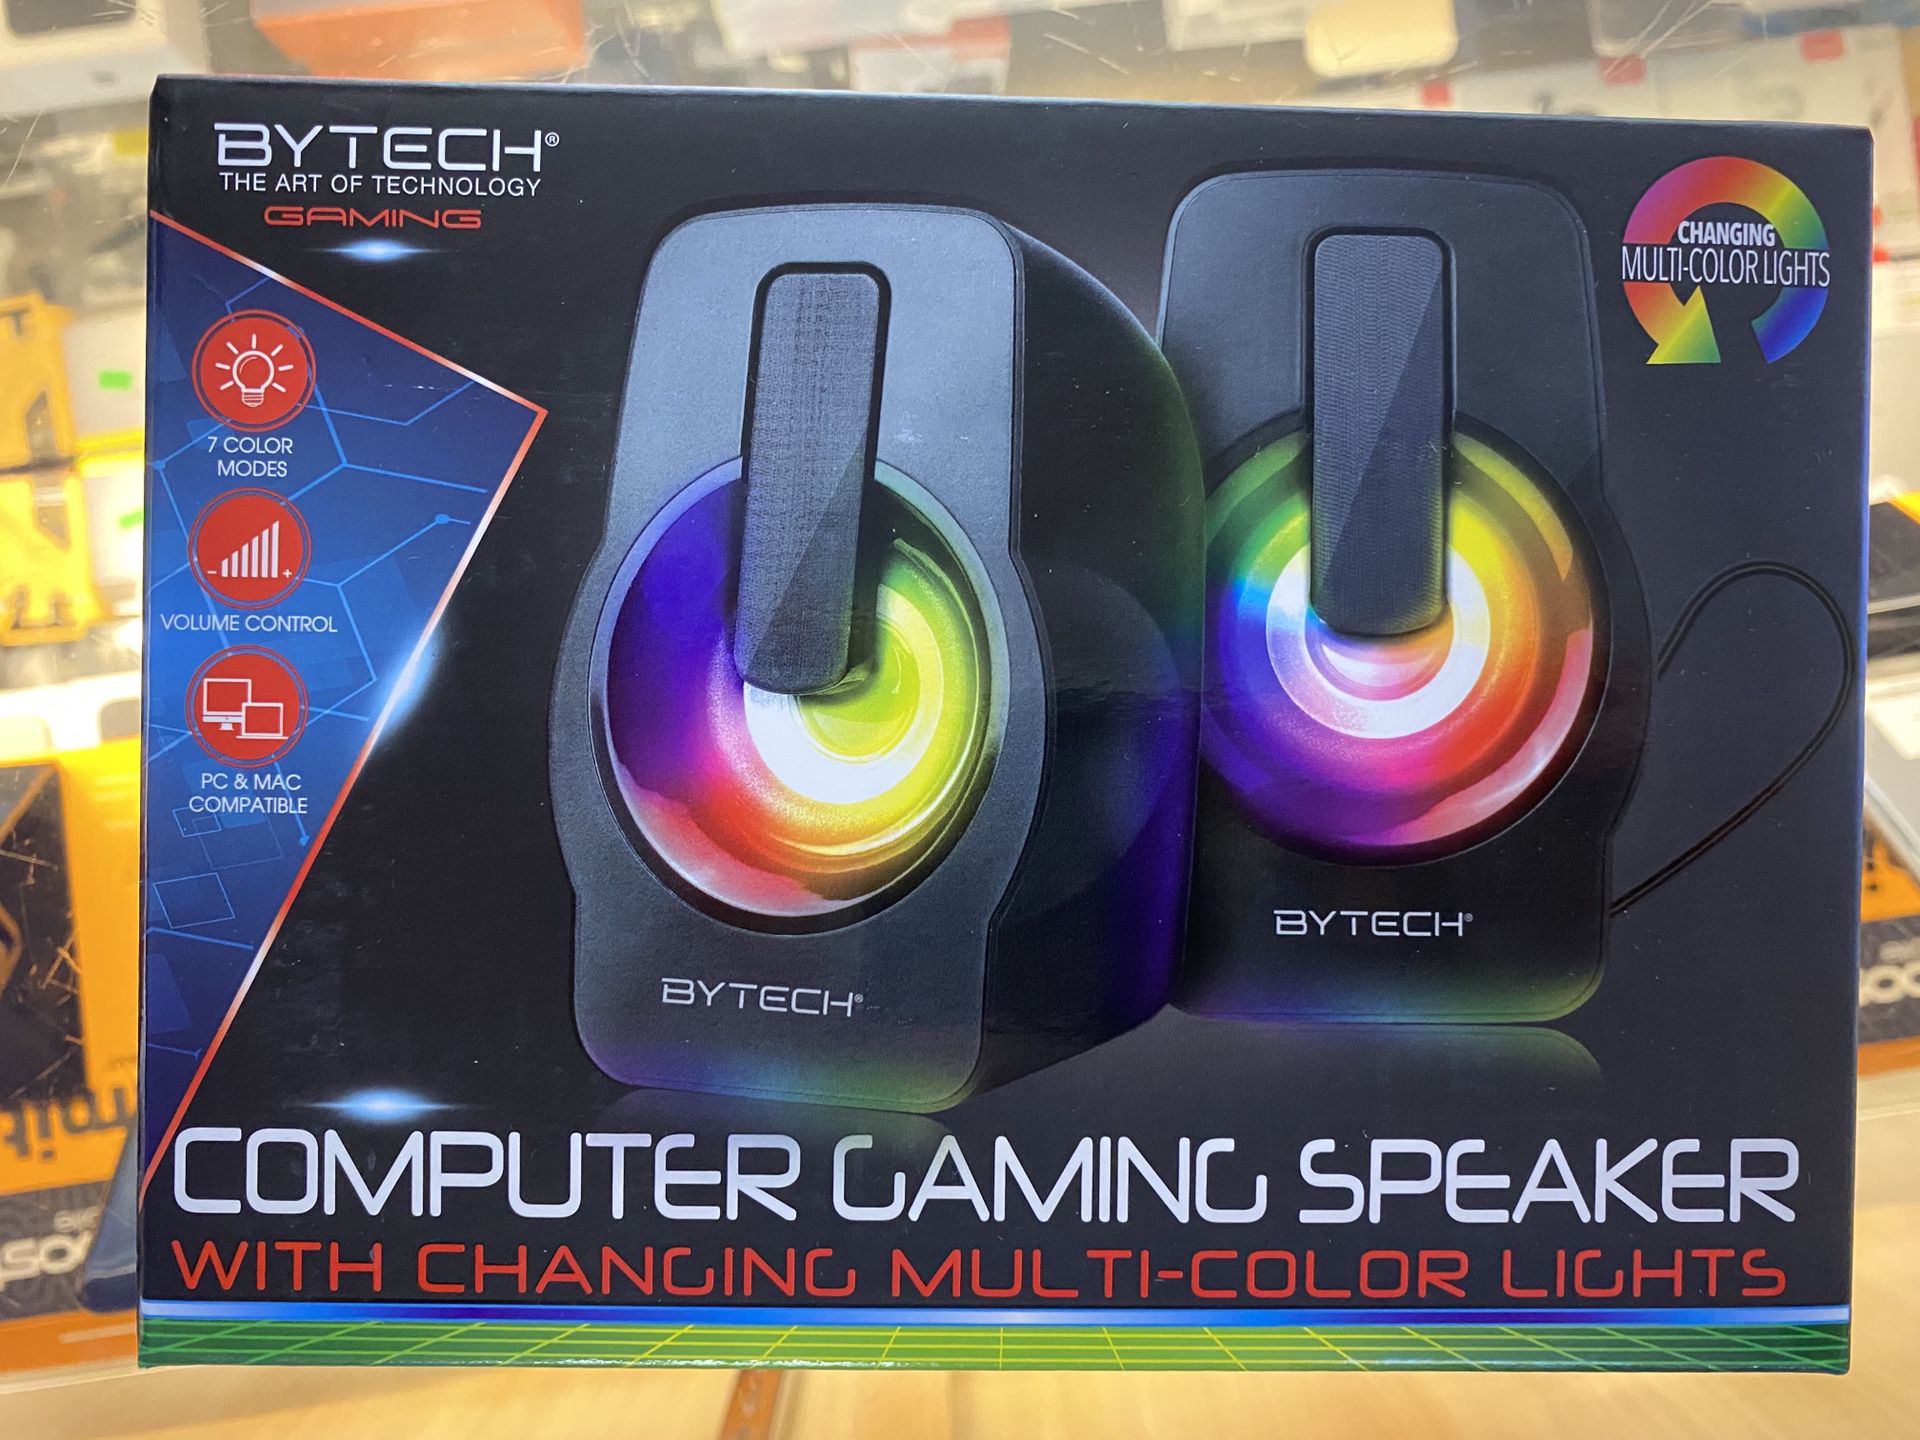 RGB MULTI COLOR COMPUTER GAMING SPEAKERS BRAND NEW IN BOX